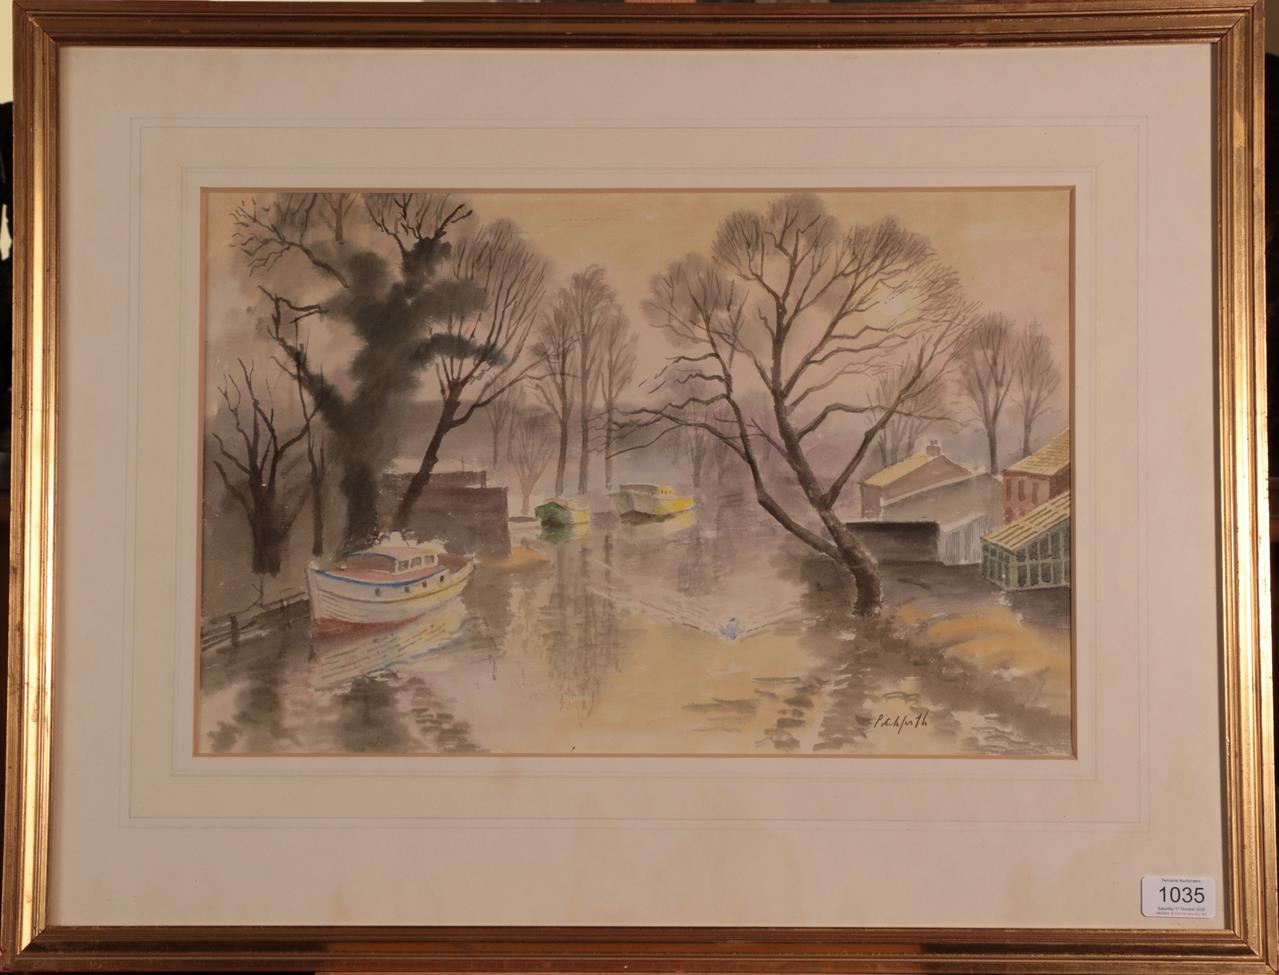 Roland Vivian Pitchforth RA, RWS, LG (1895-1982) River scene Signed, watercolour, 31cm by 46.5cm - Image 2 of 3